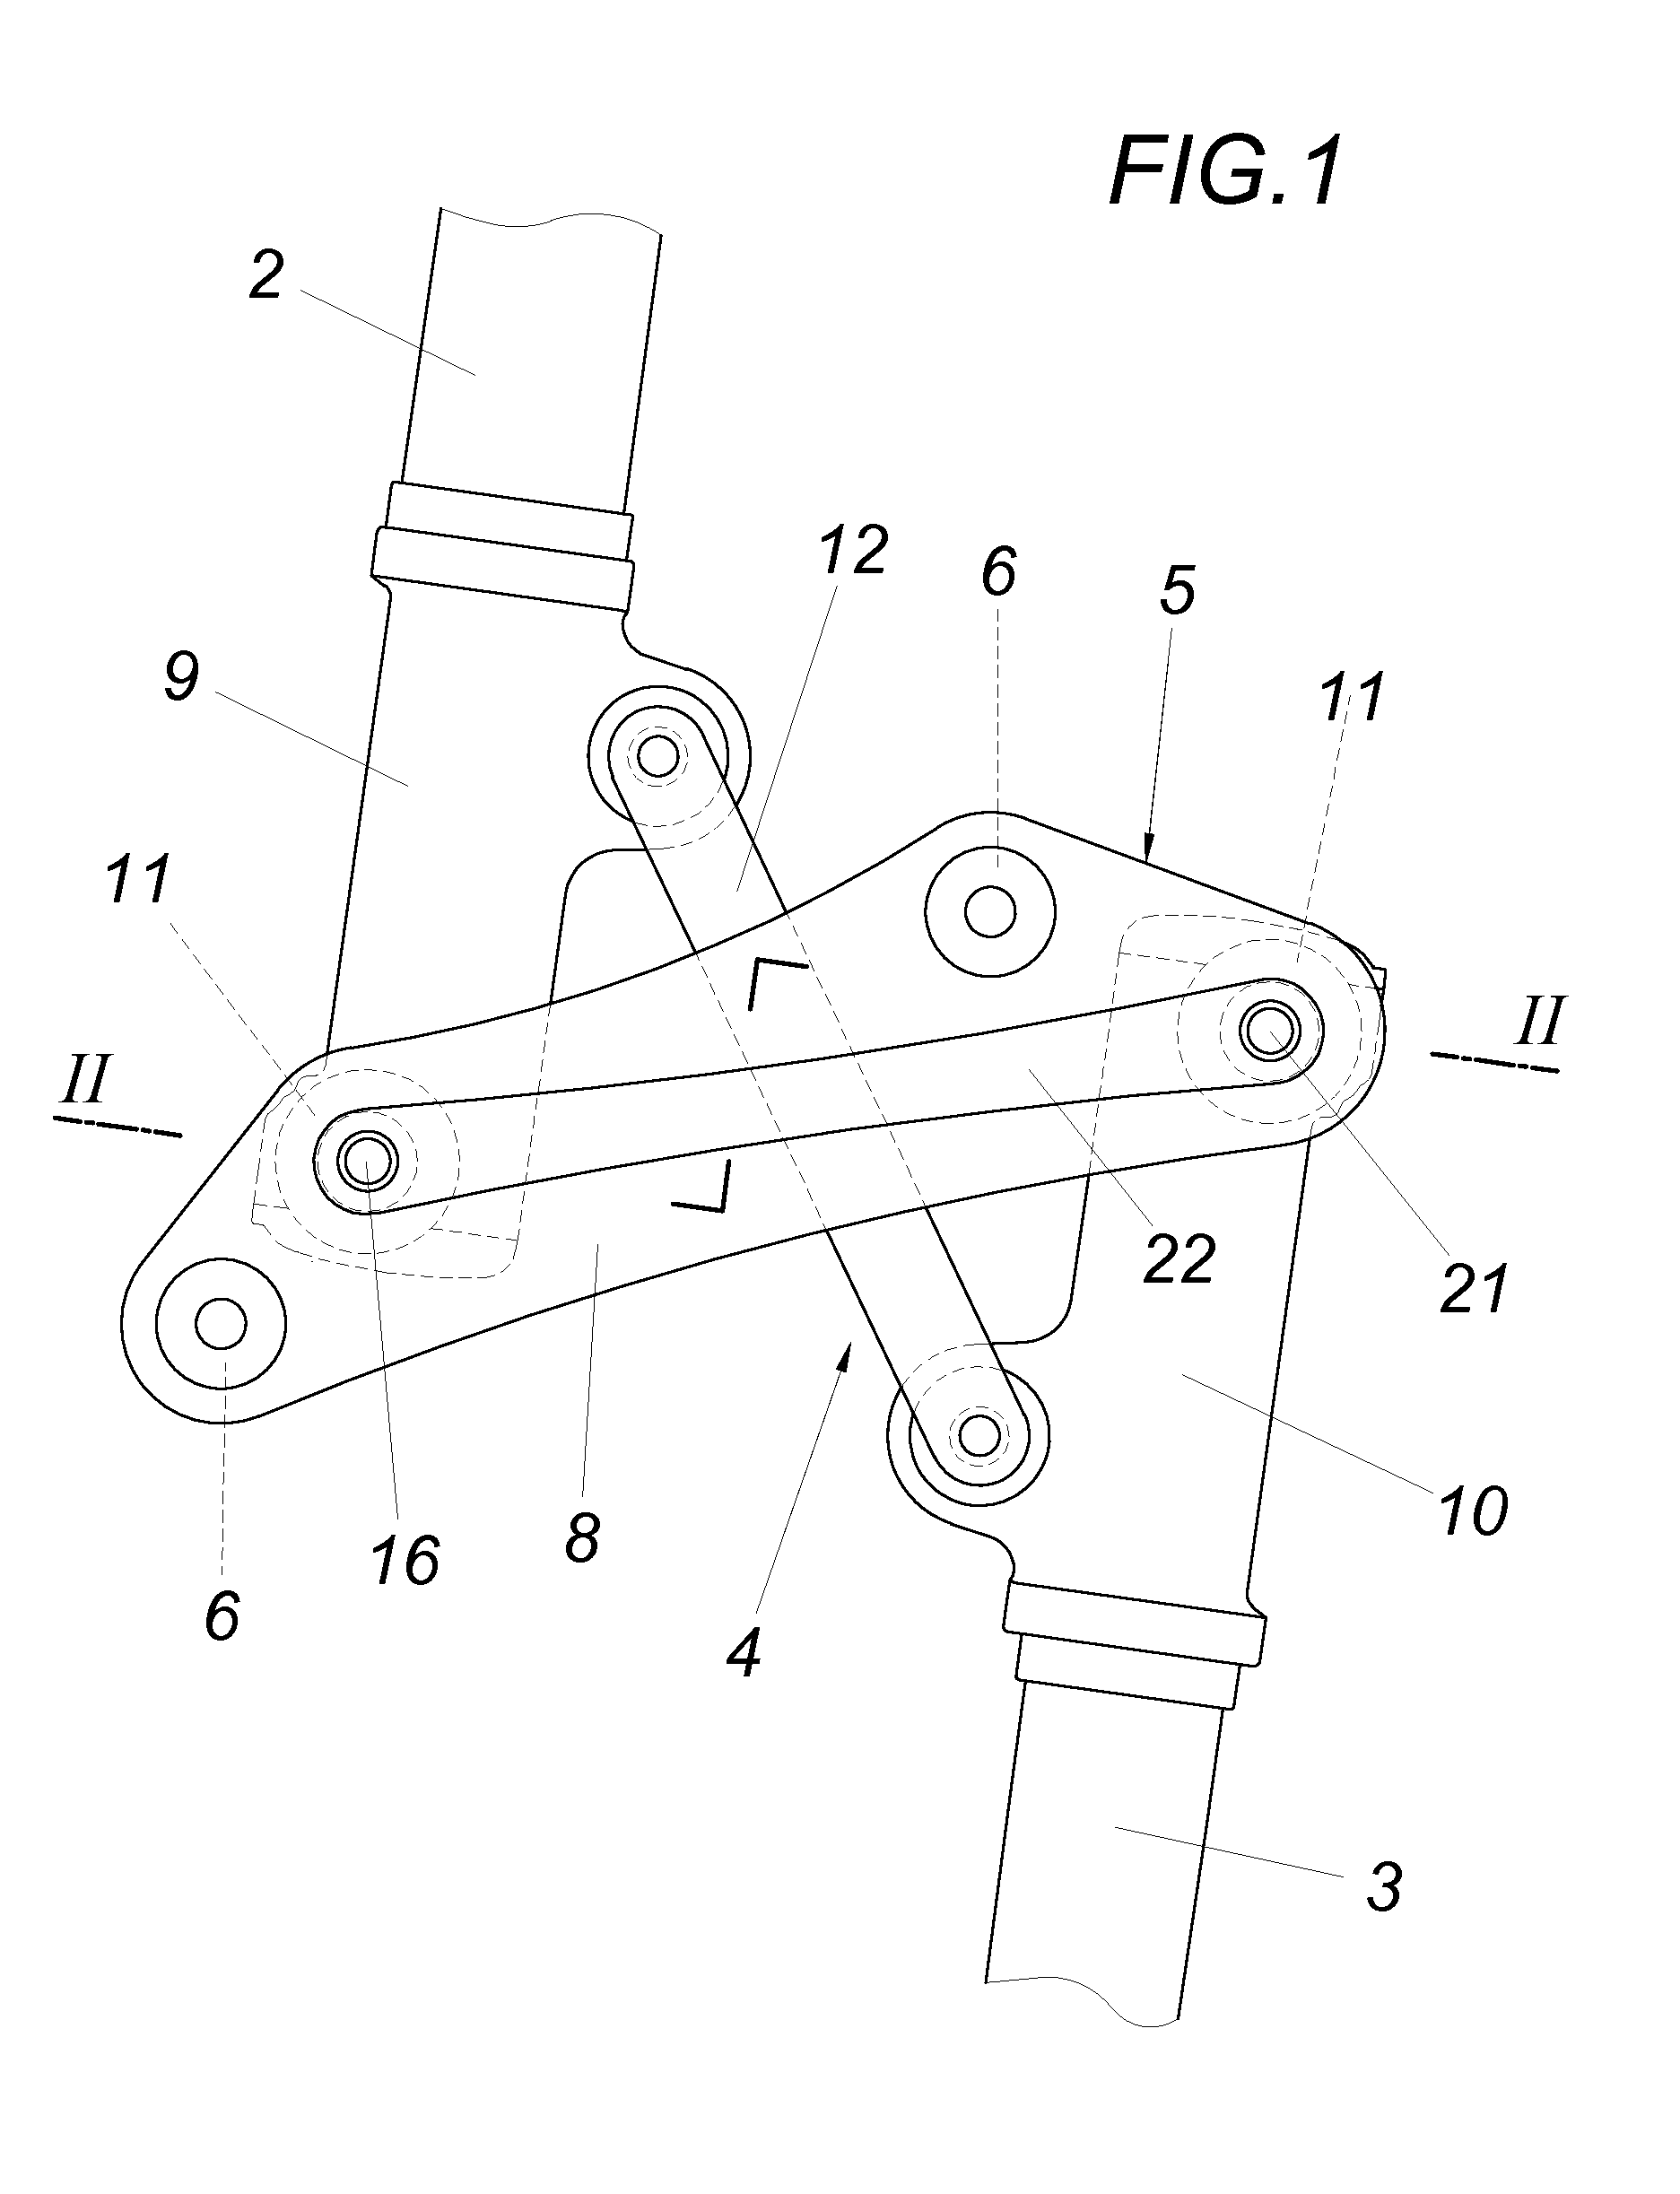 Apparatus for rowing in the direction the rower is facing